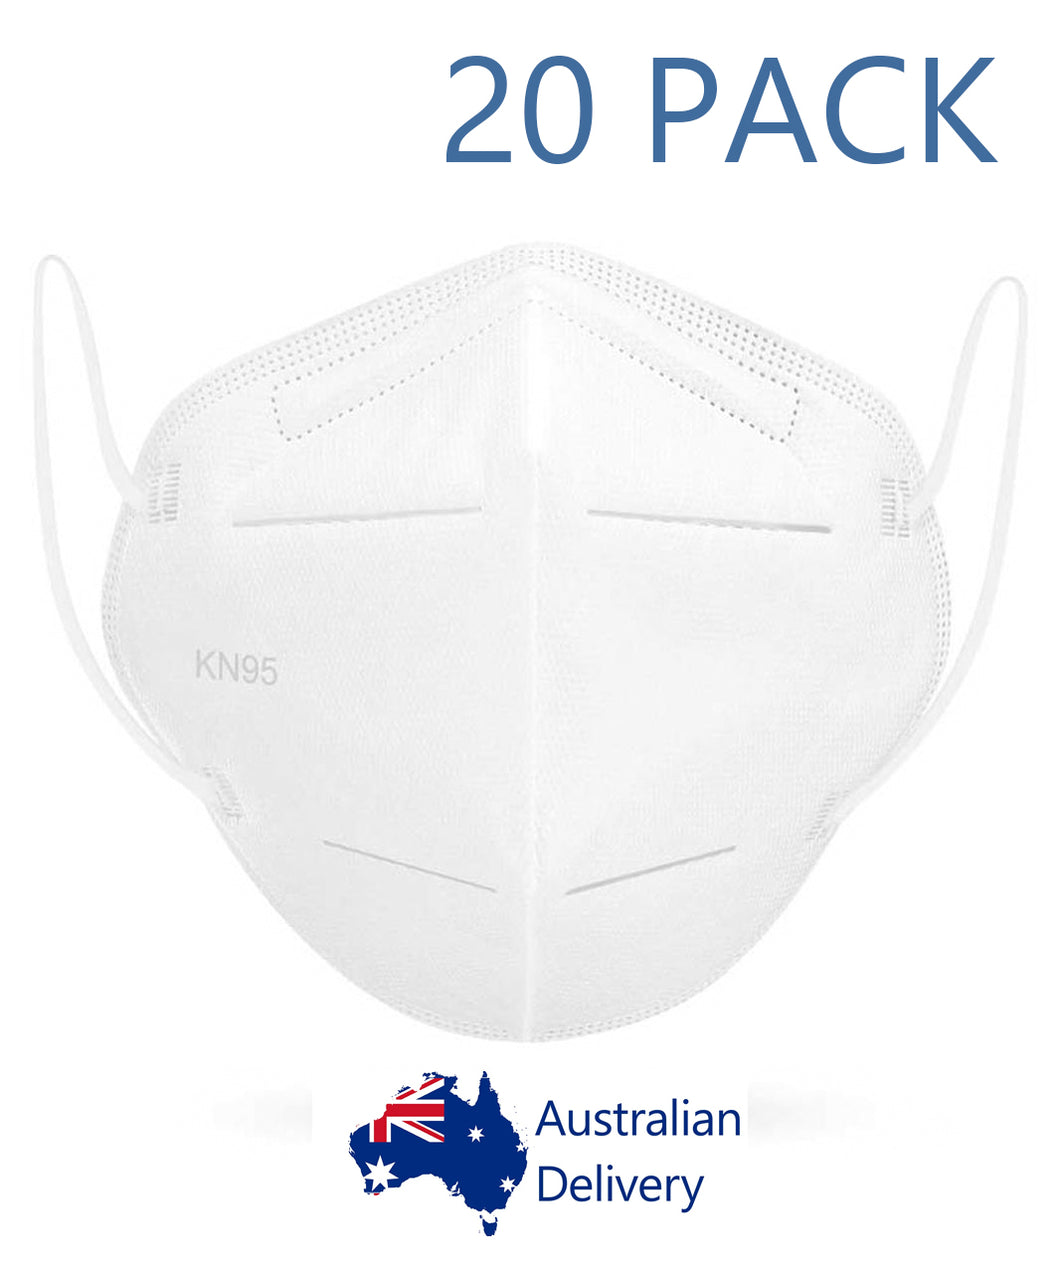 KN95 Masks (20 pack)                IN STOCK - BUY NOW